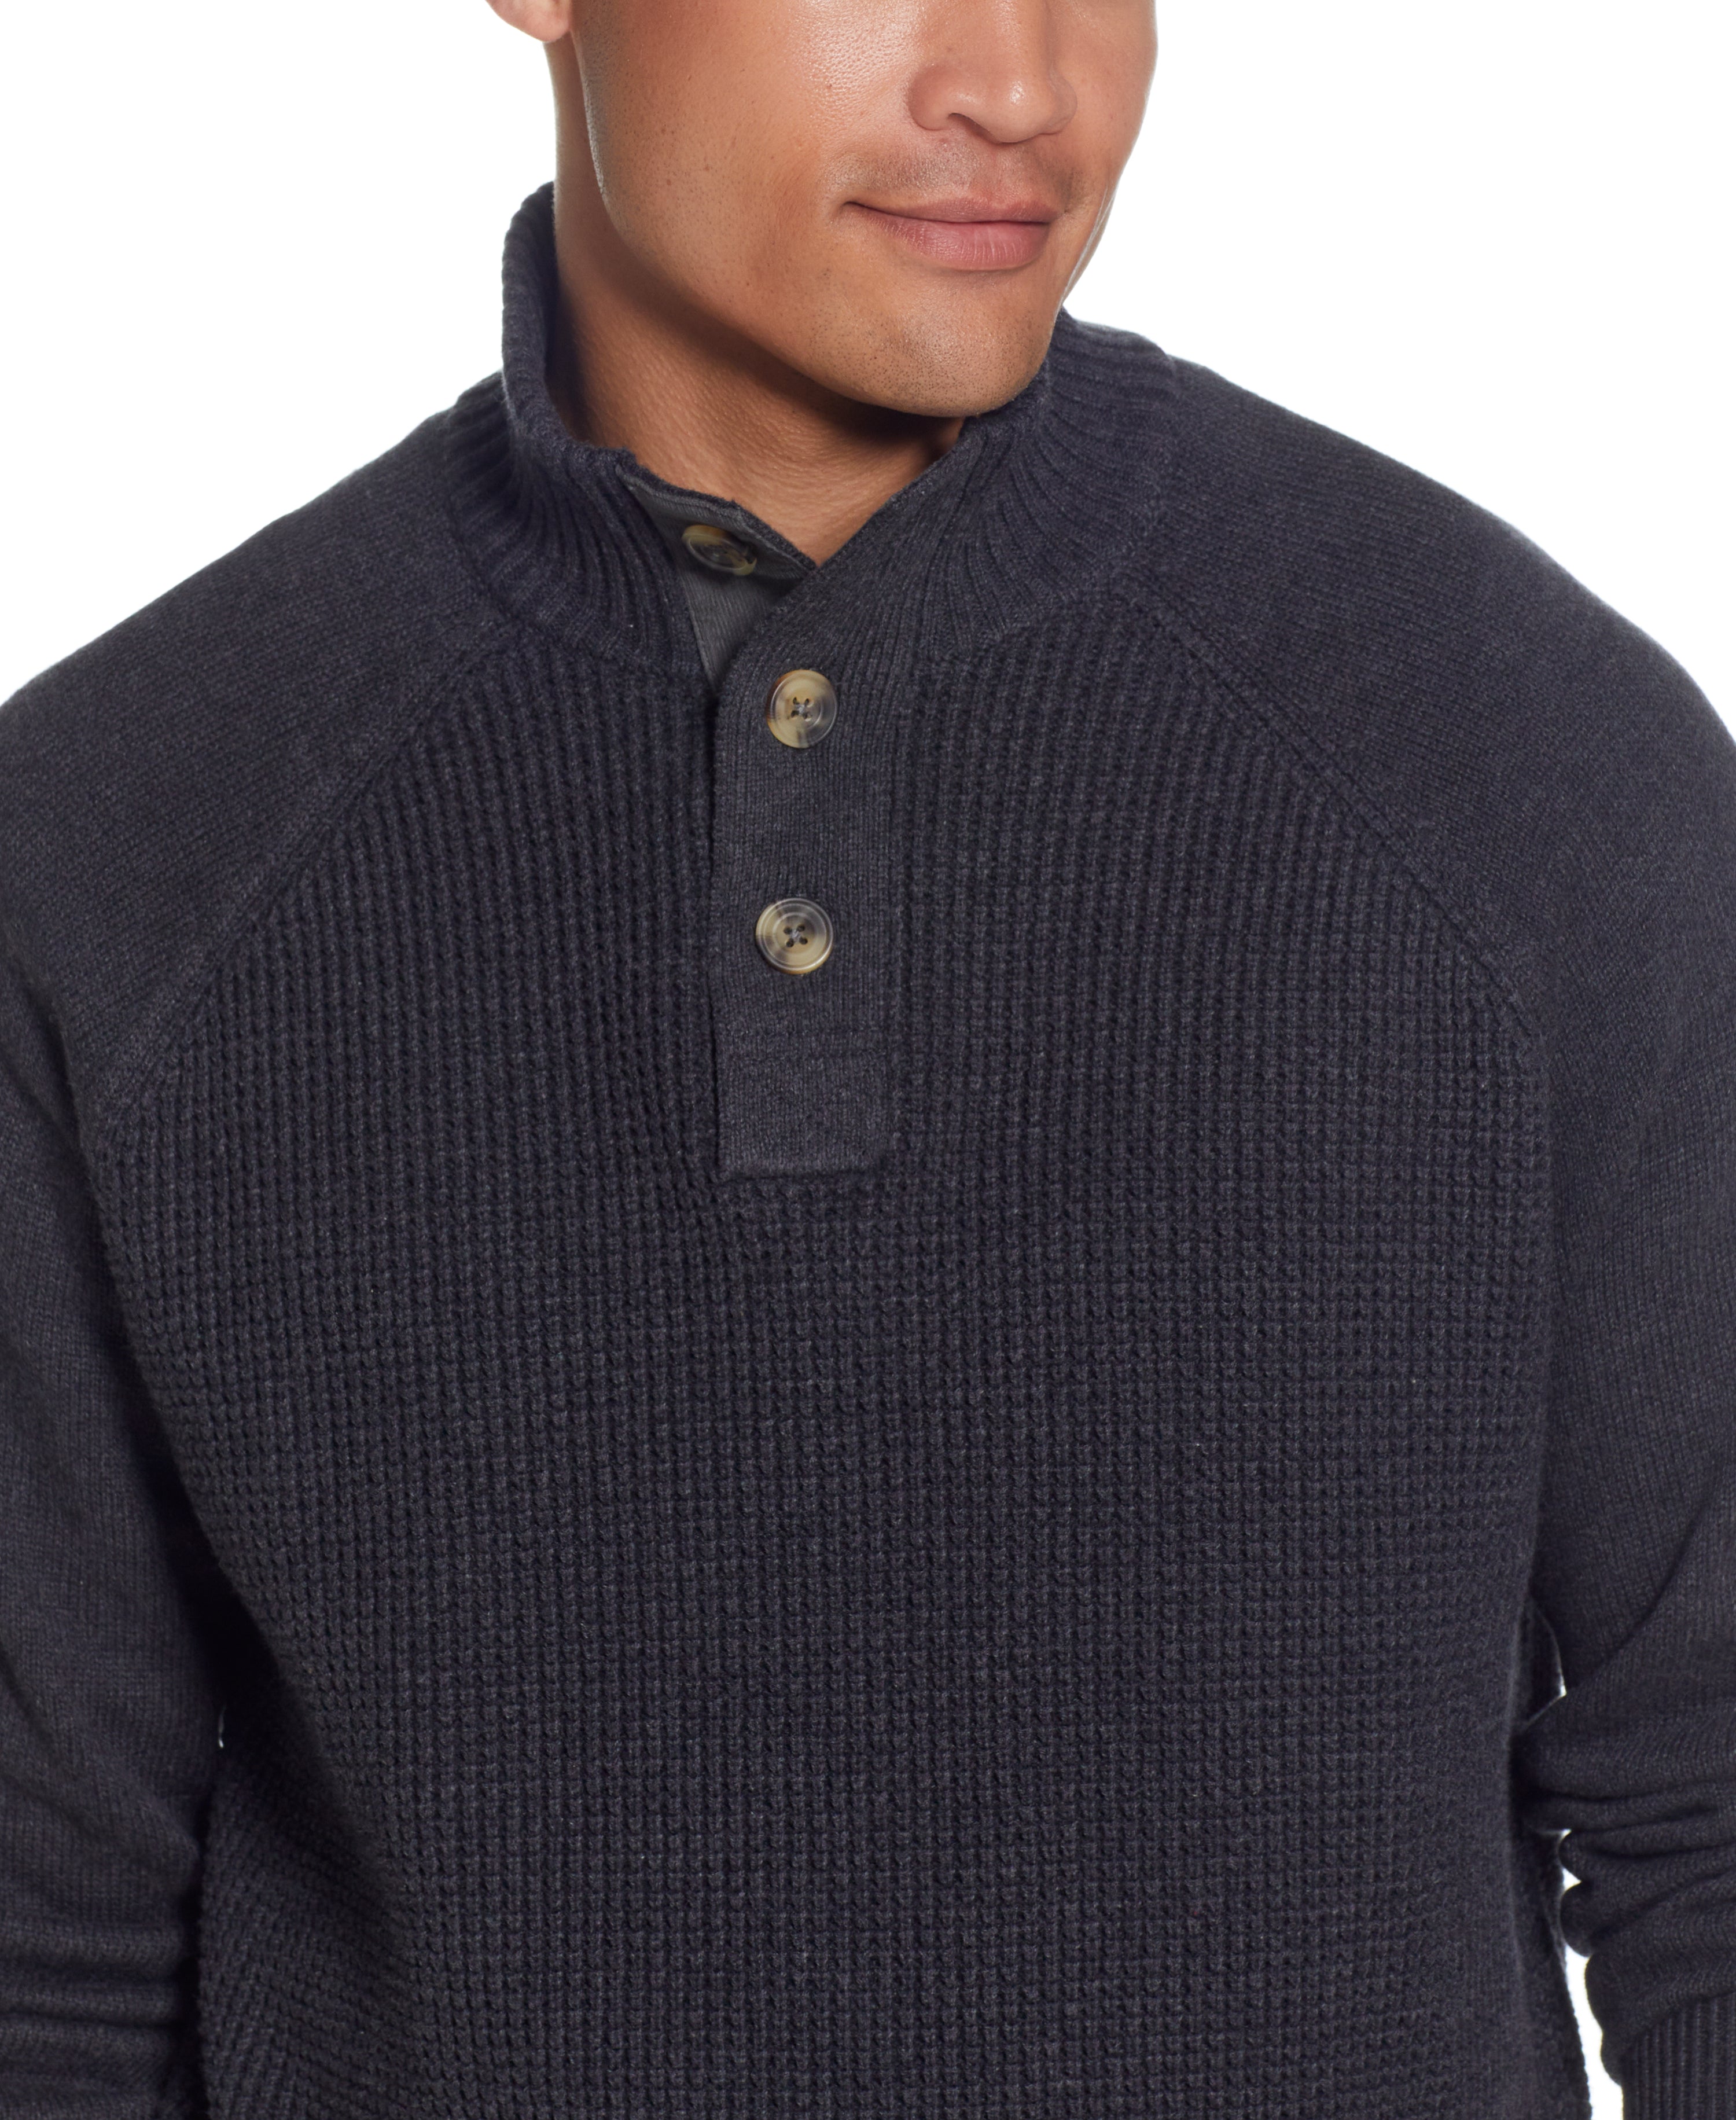 RAGLAN SLEEVES SHAKER STITCH BUTTONUP MOCK in CHAR HEATHER